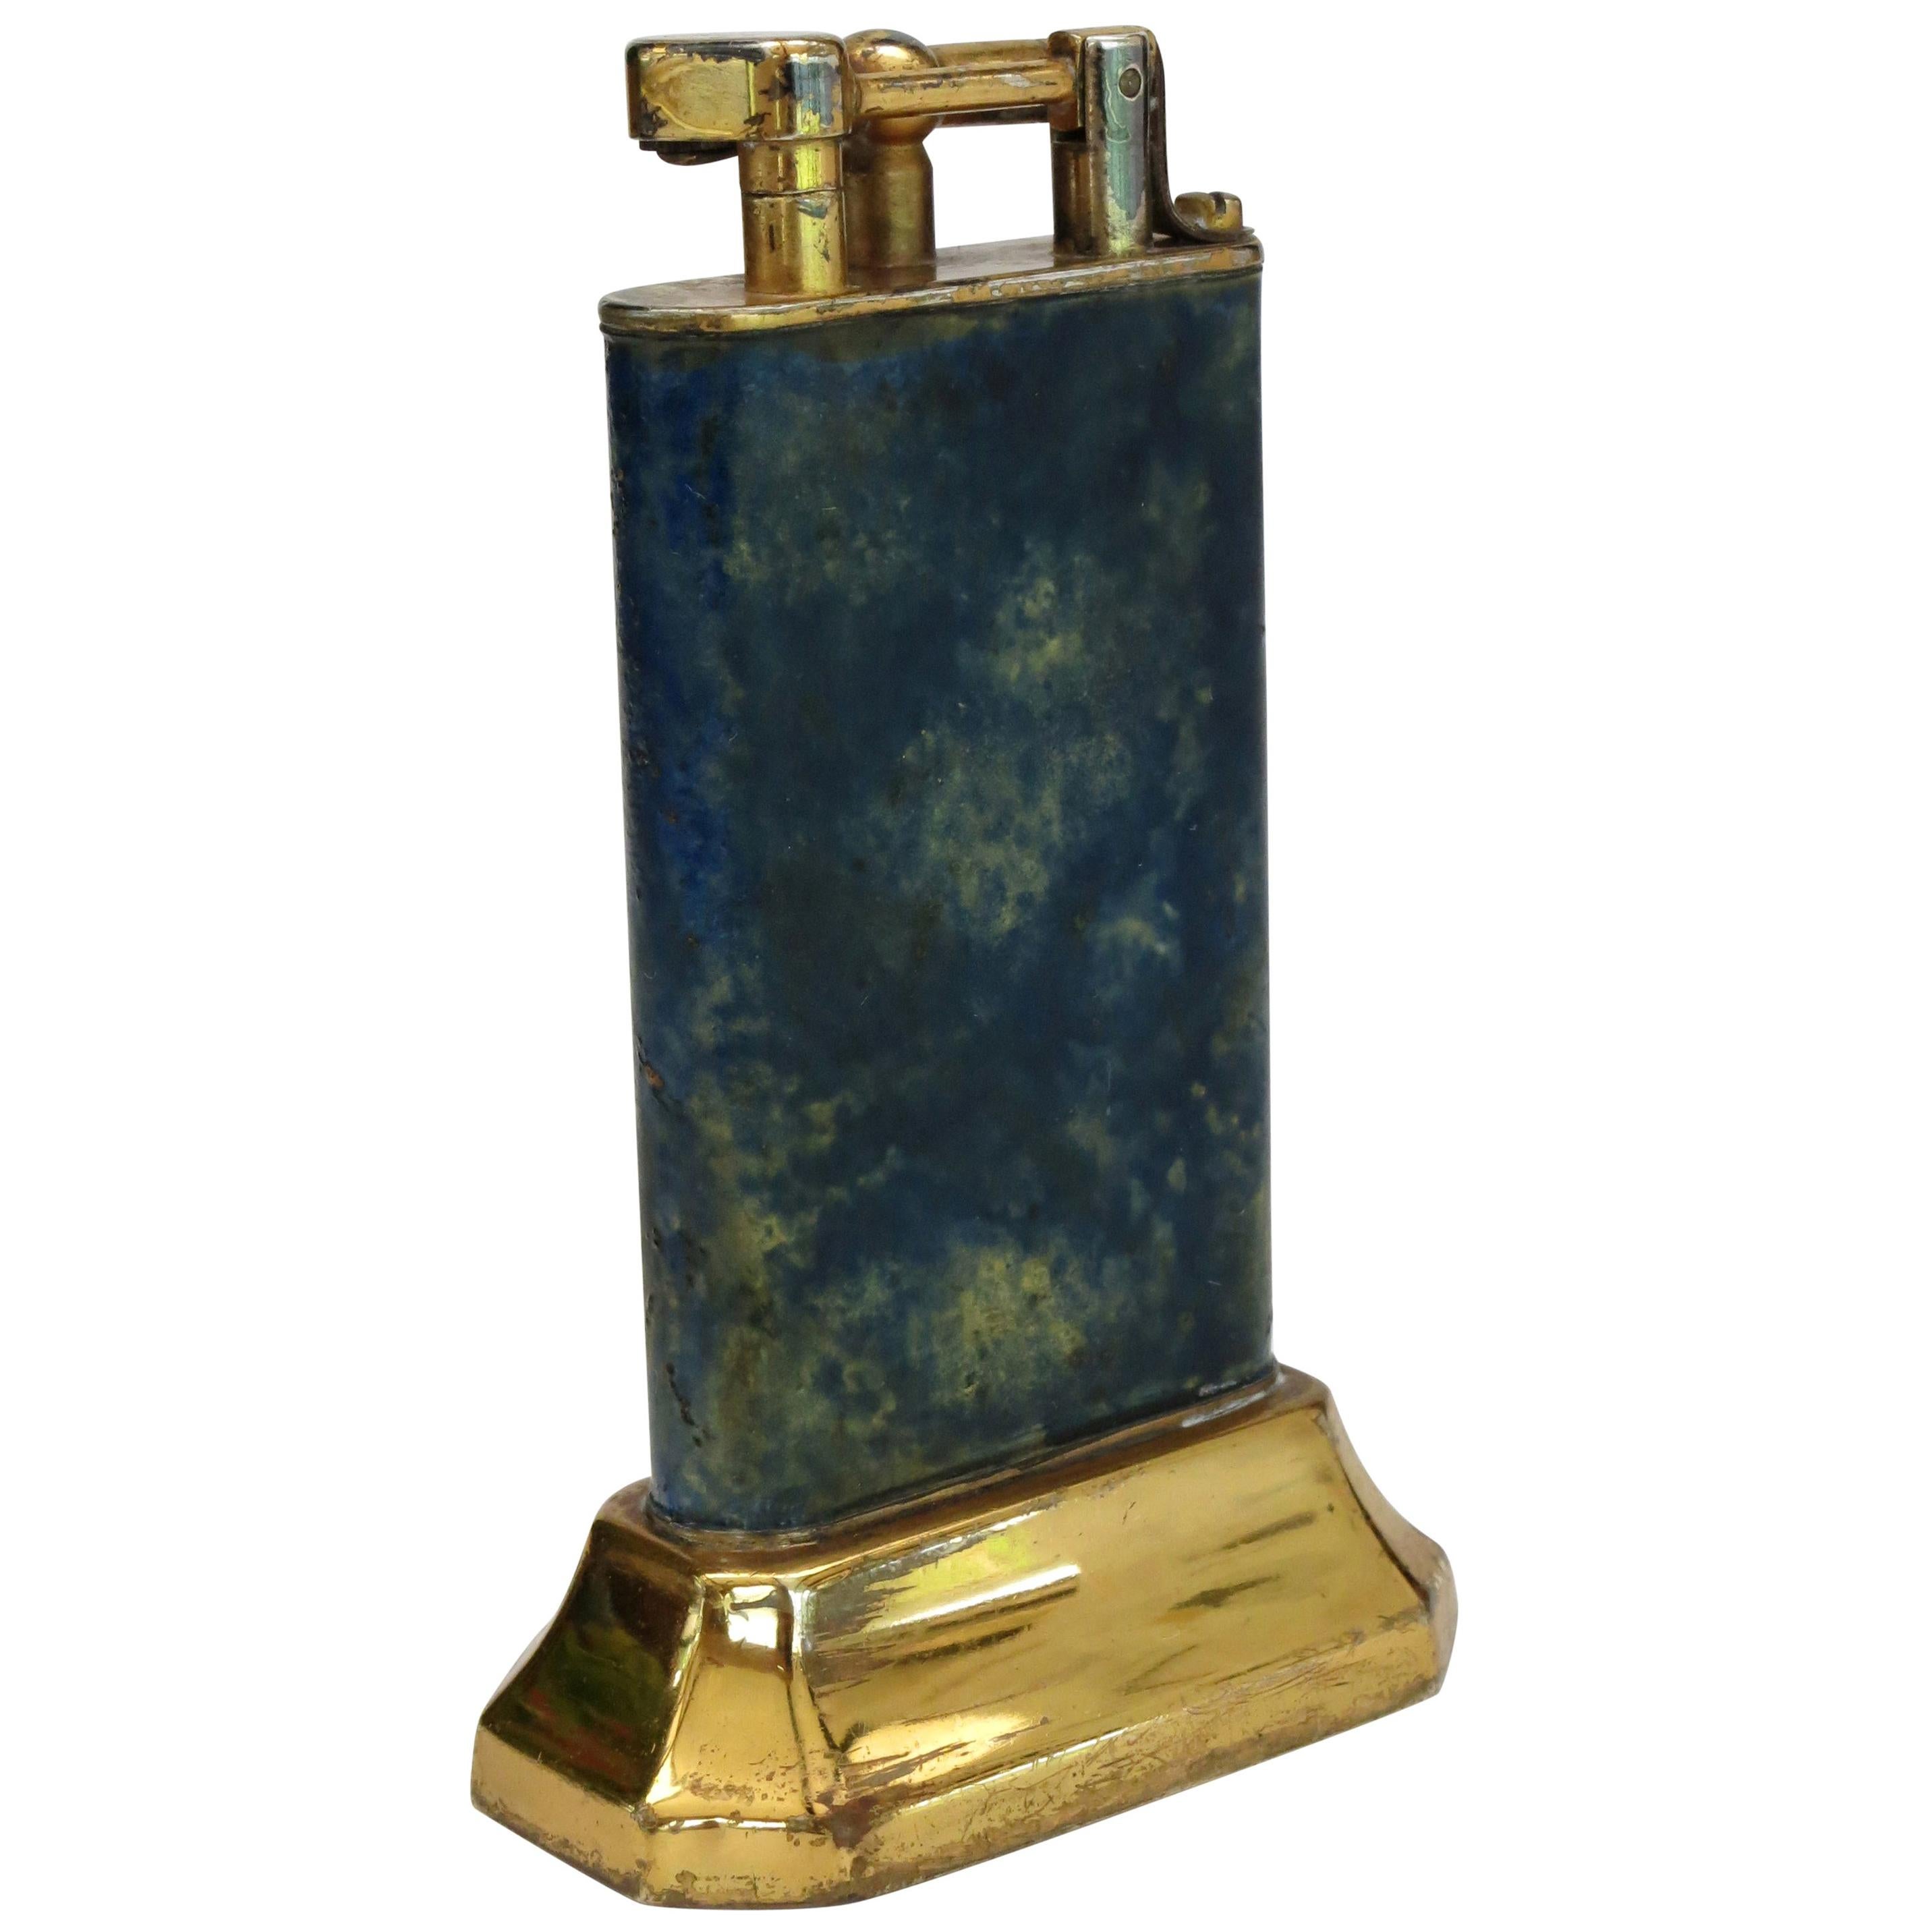 Dunhill Lift Arm Table Lighter Blue Mottled Lacquer Finish